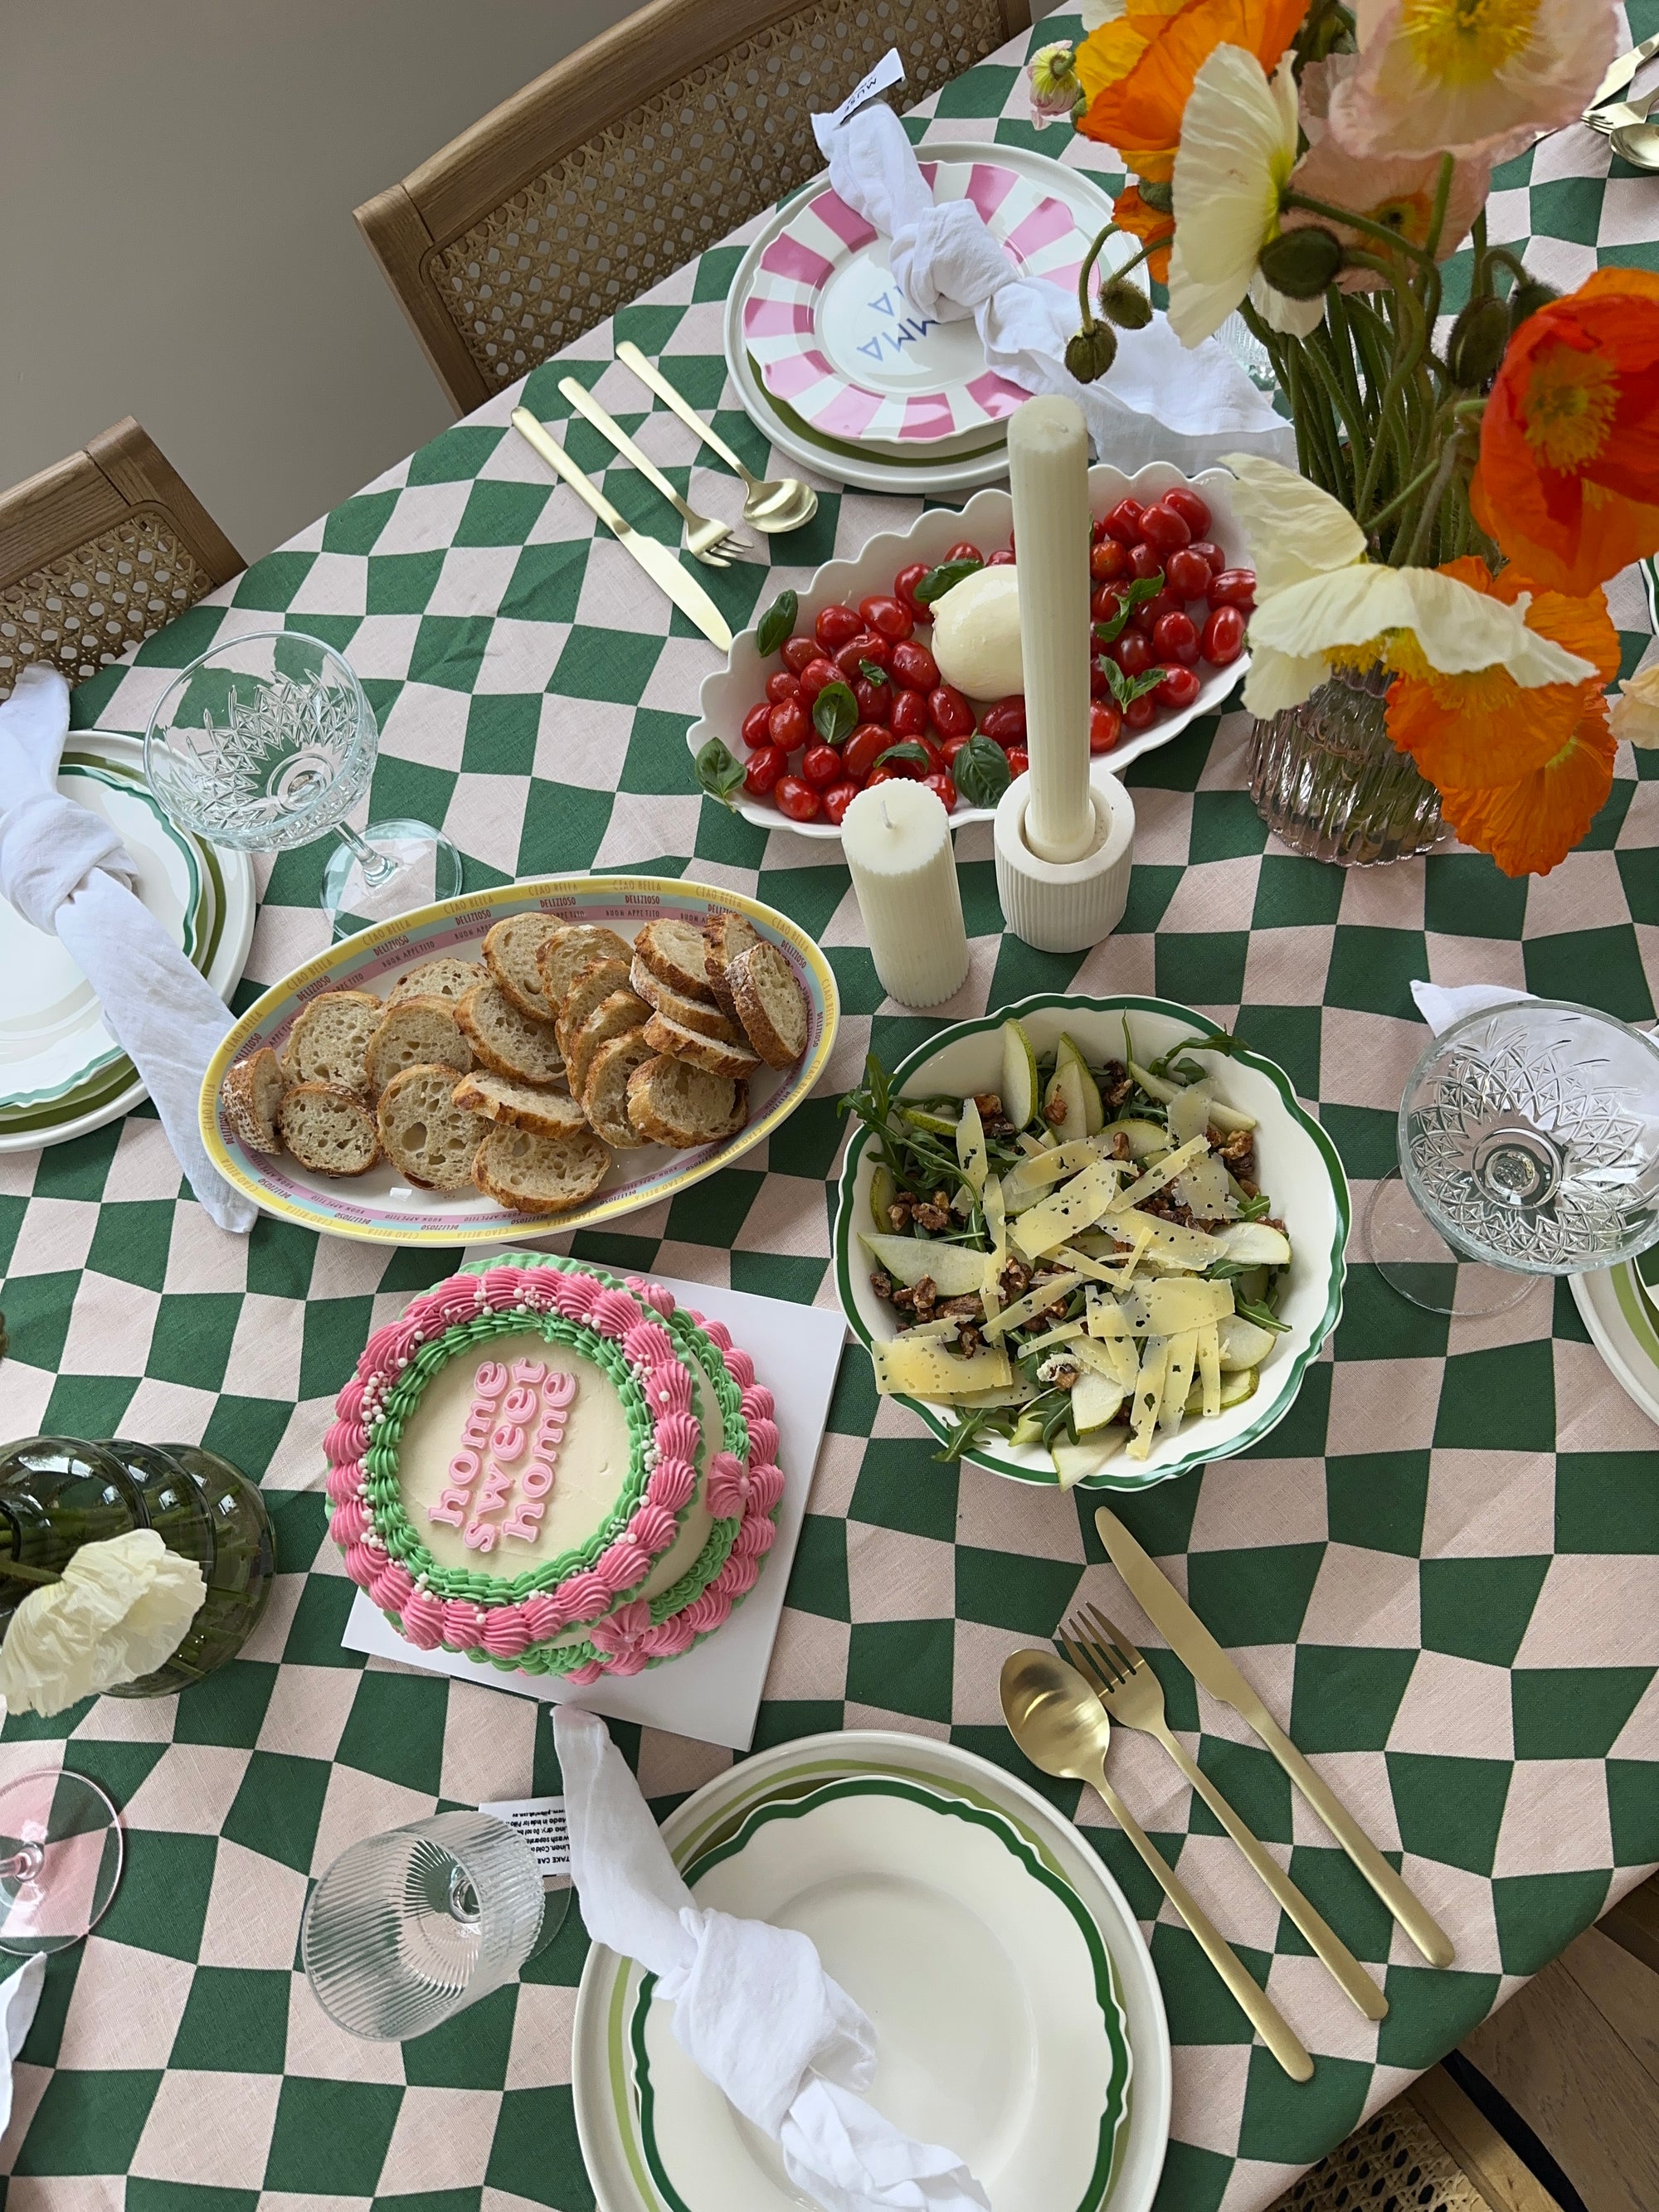 6 Tips For Hosting A Dinner Party by Alex Davidson